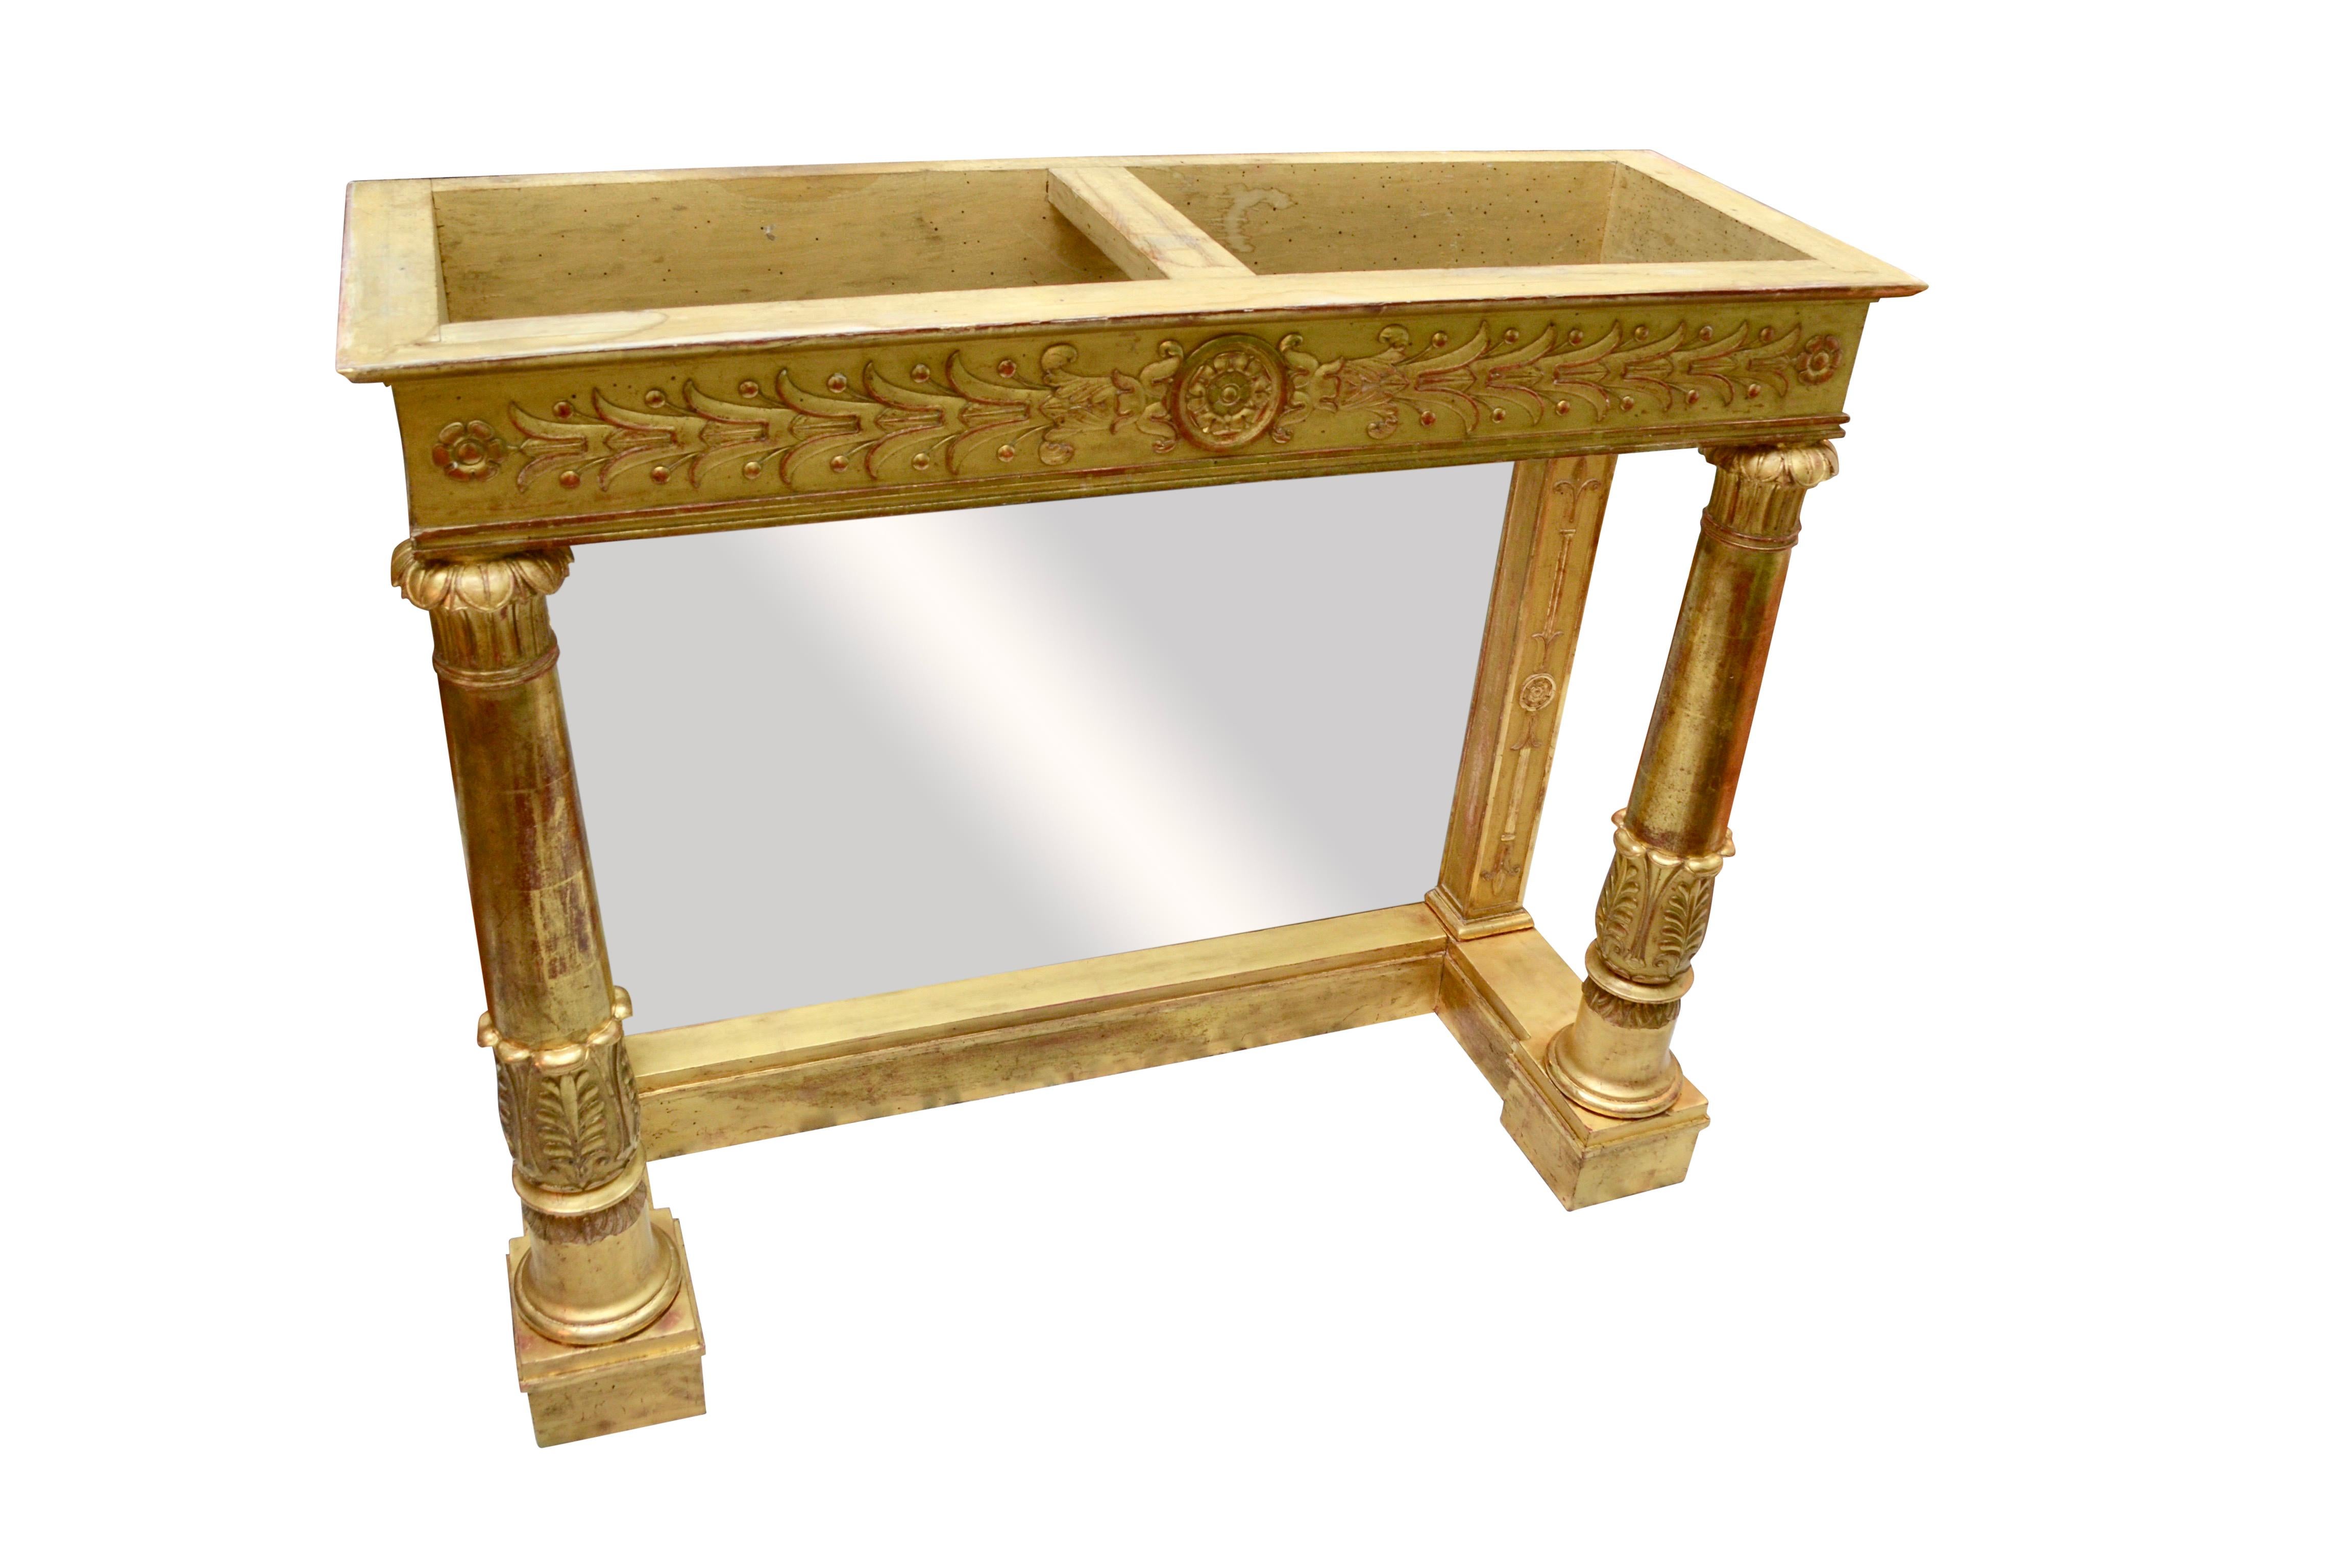 A period French Empire gilded beechwood console having a white marble top and mirrored back. The console has two front turned legs with carved decoration to the top and bottom. The frieze is decorated with a carved central rosette between entwined